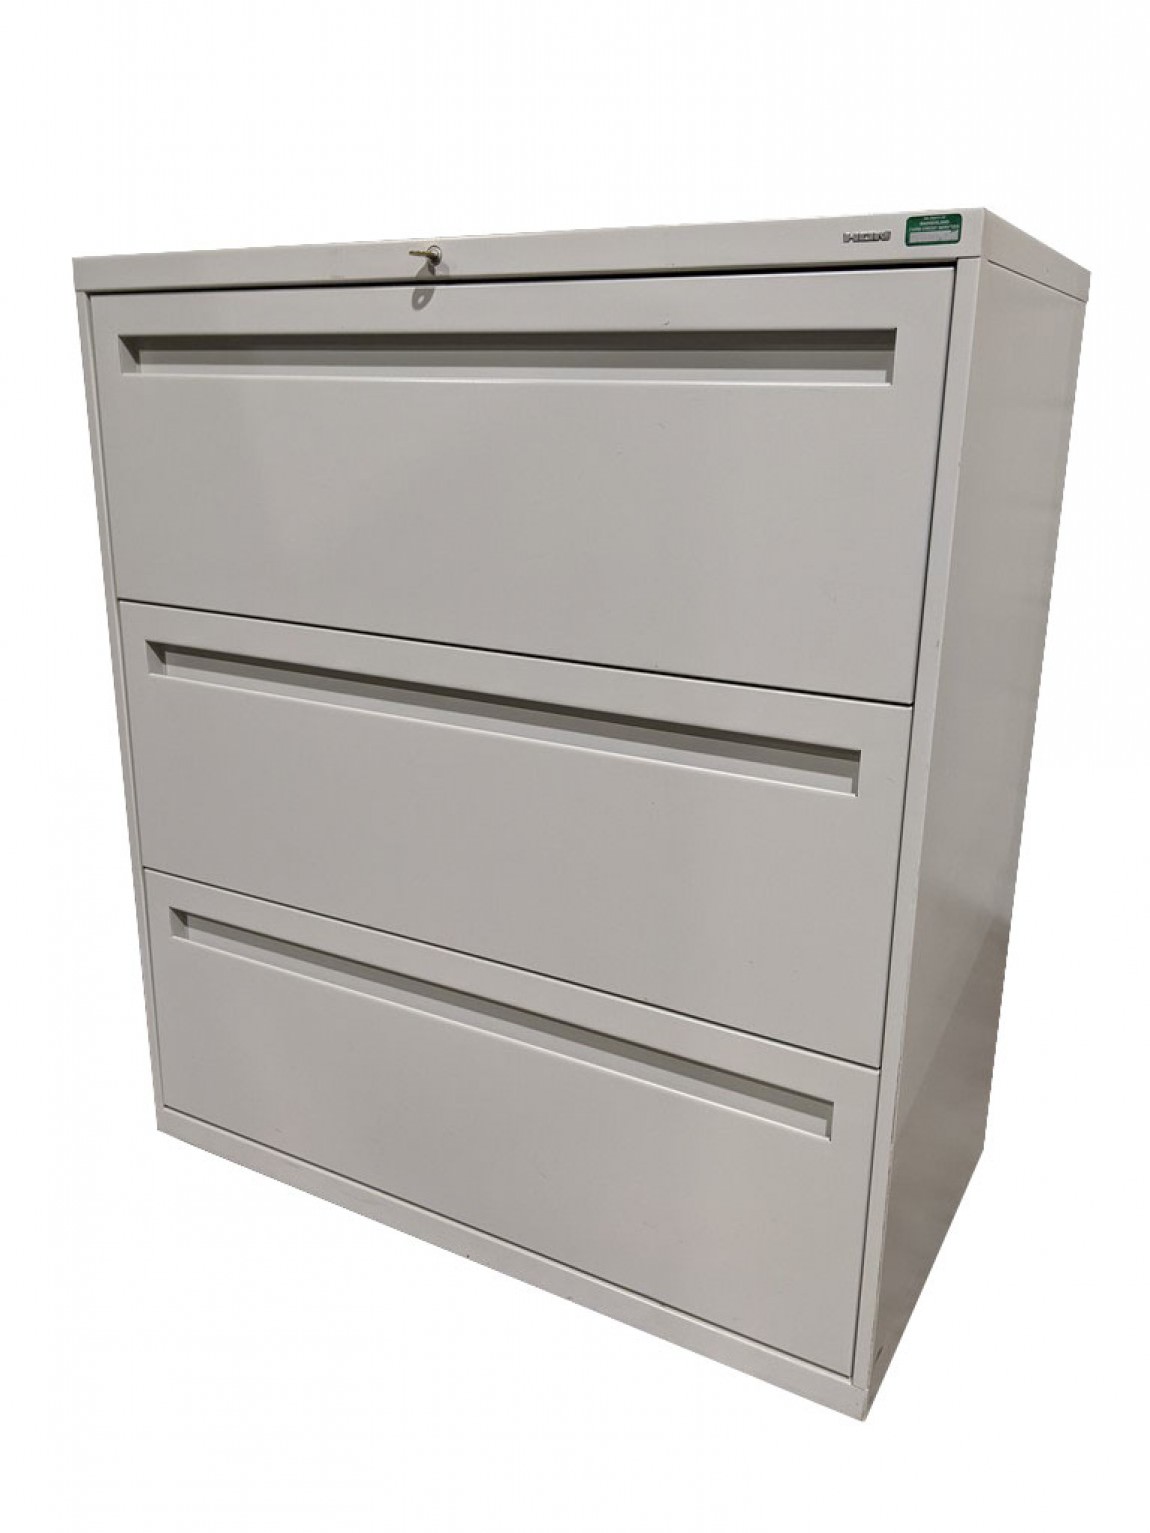 Putty Hon 3 Drawer Lateral Filing Cabinet 36 Inch Wide By